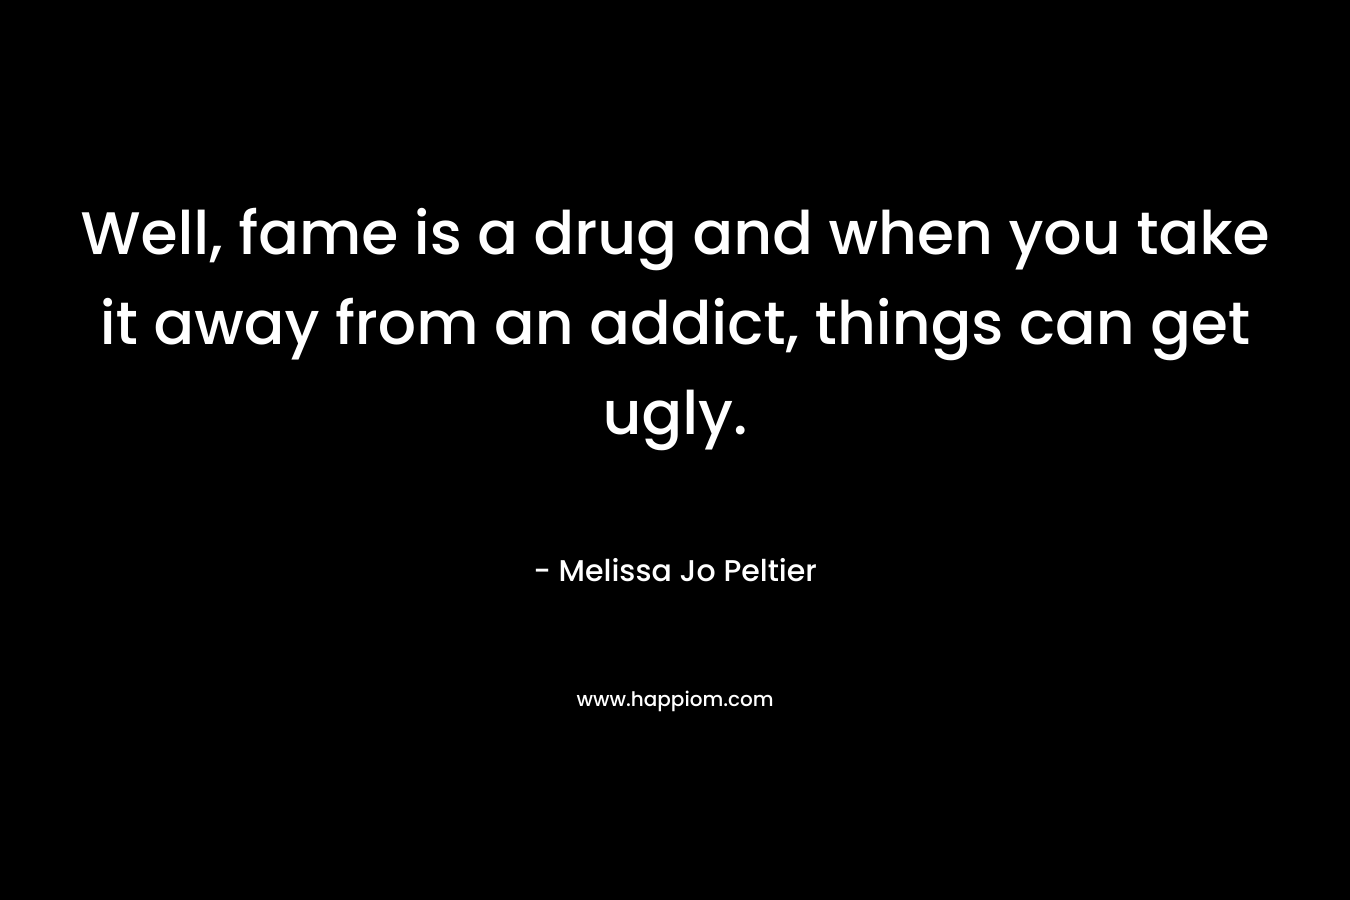 Well, fame is a drug and when you take it away from an addict, things can get ugly.